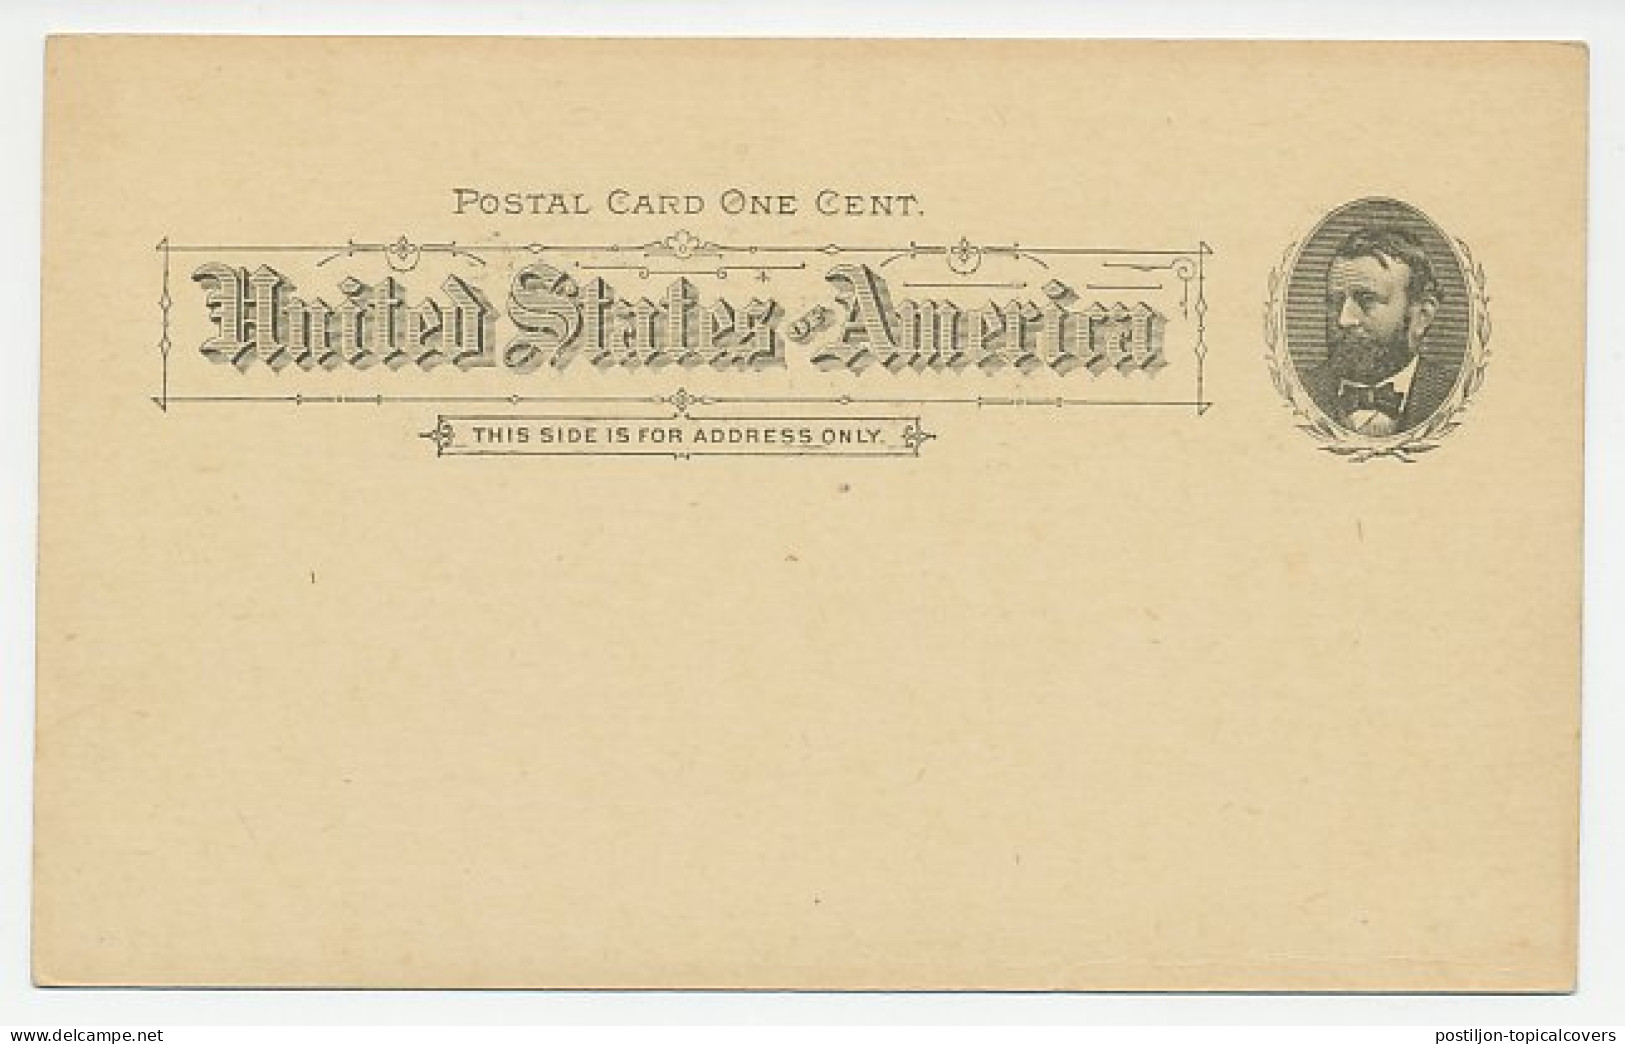 Postal Stationery USA 1893 Worlds Columbian Exposition - The Electric Building - Light Bulb - Elektriciteit